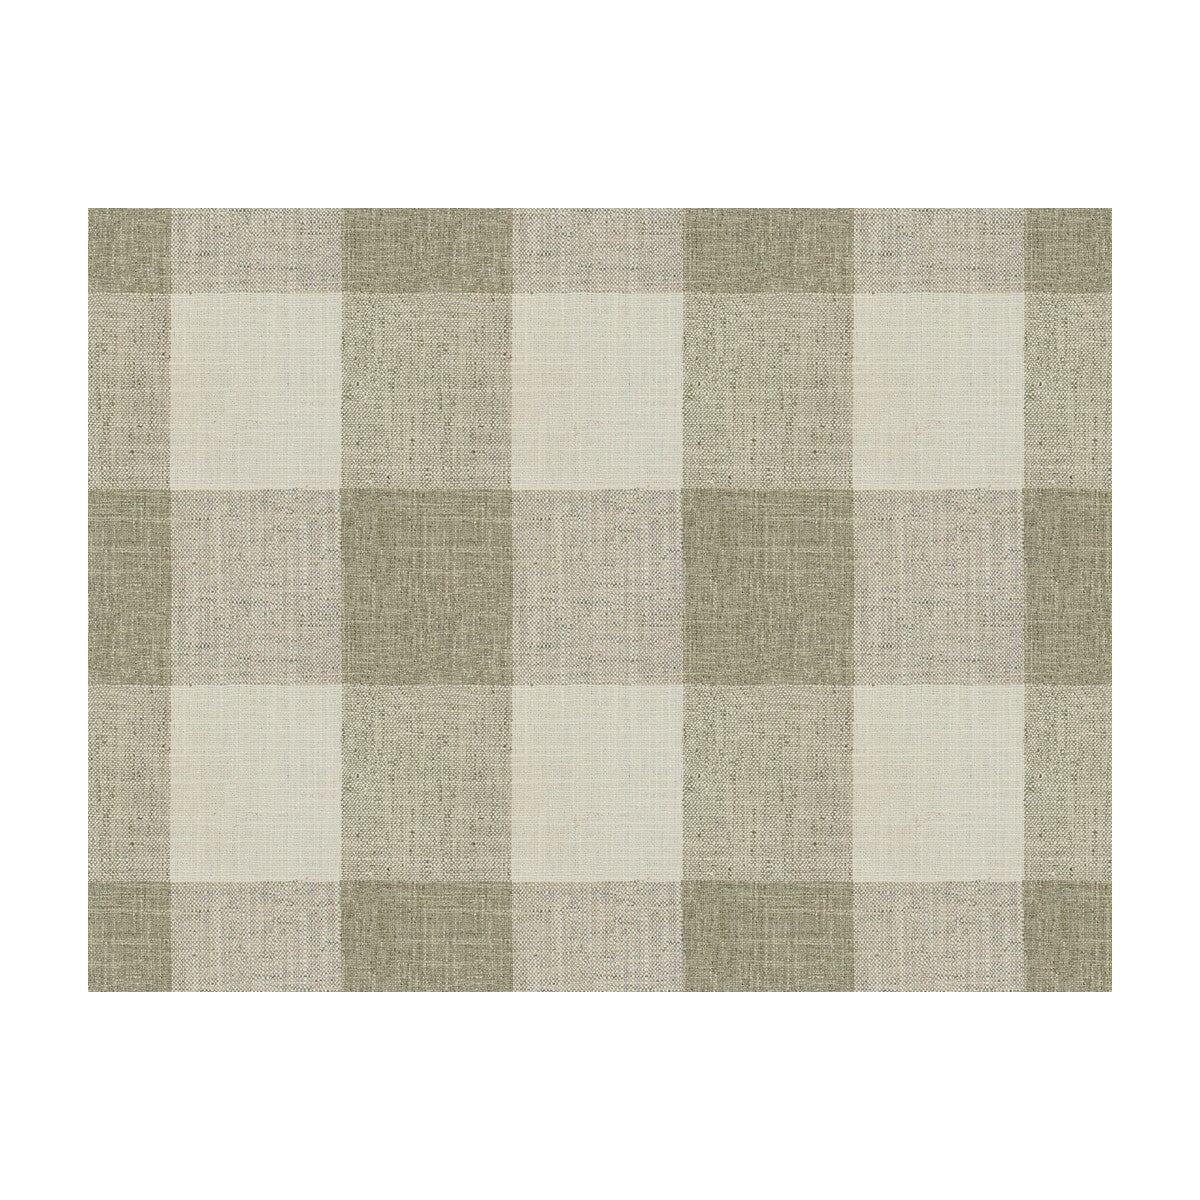 Kravet Basics fabric in 34090-1101 color - pattern 34090.1101.0 - by Kravet Basics in the Bungalow Chic II collection